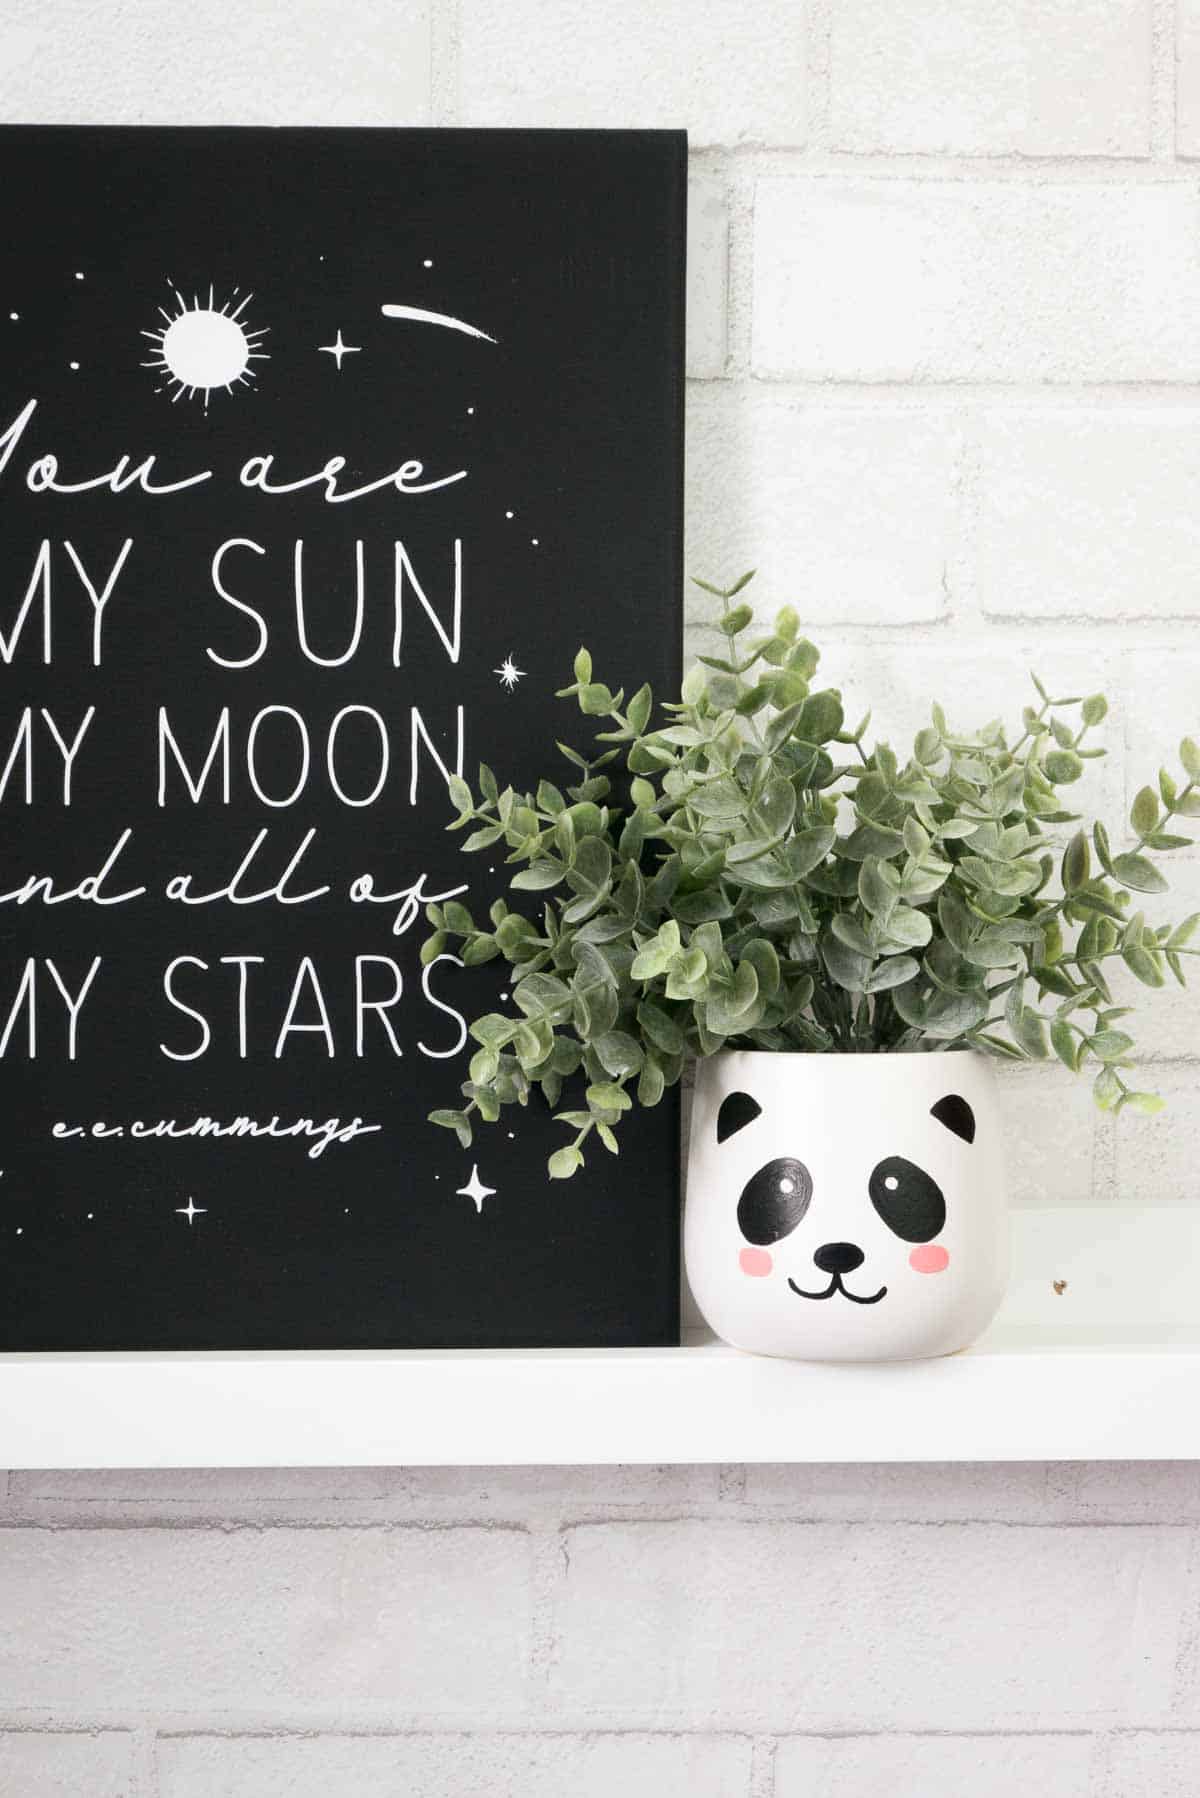 White ceramic planter with painted panda face on a ledge.